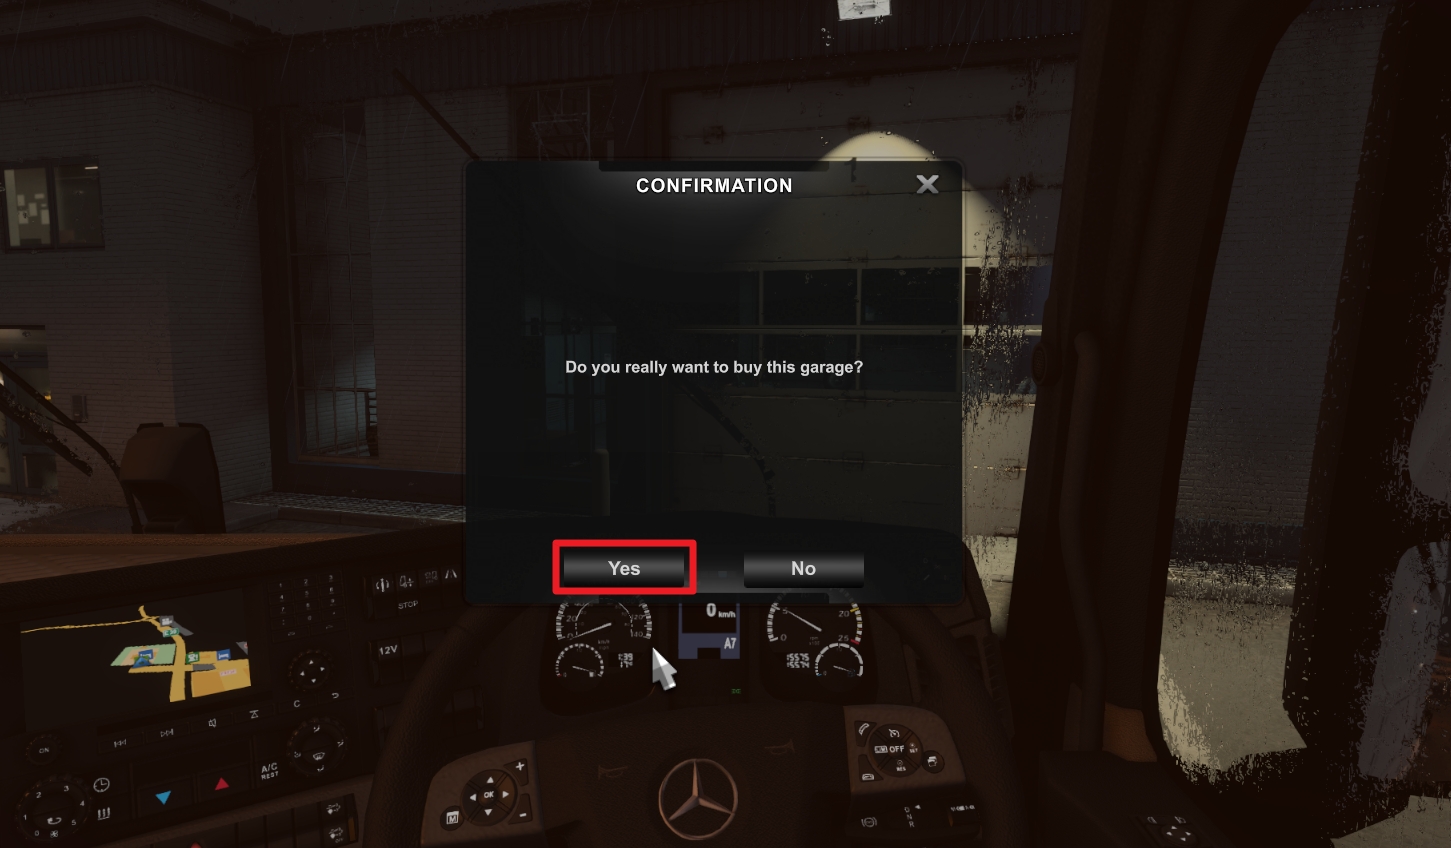 yes 1 - How to Buy a New Garage in Euro Truck Simulator 2 19